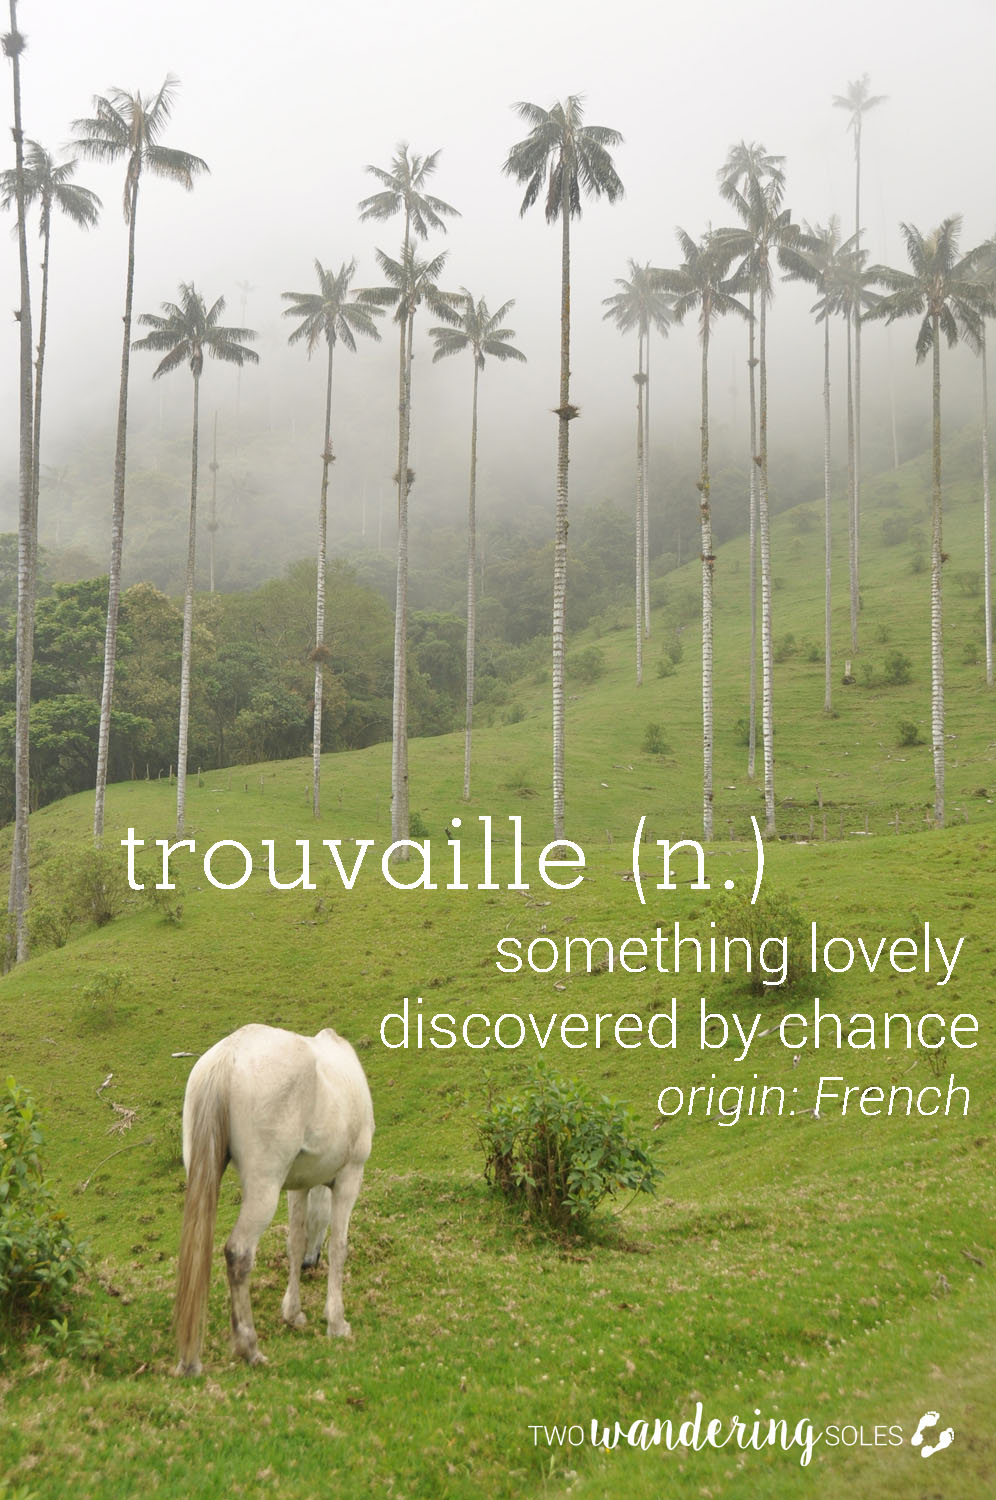 Trouvaille Awesome Travel Words